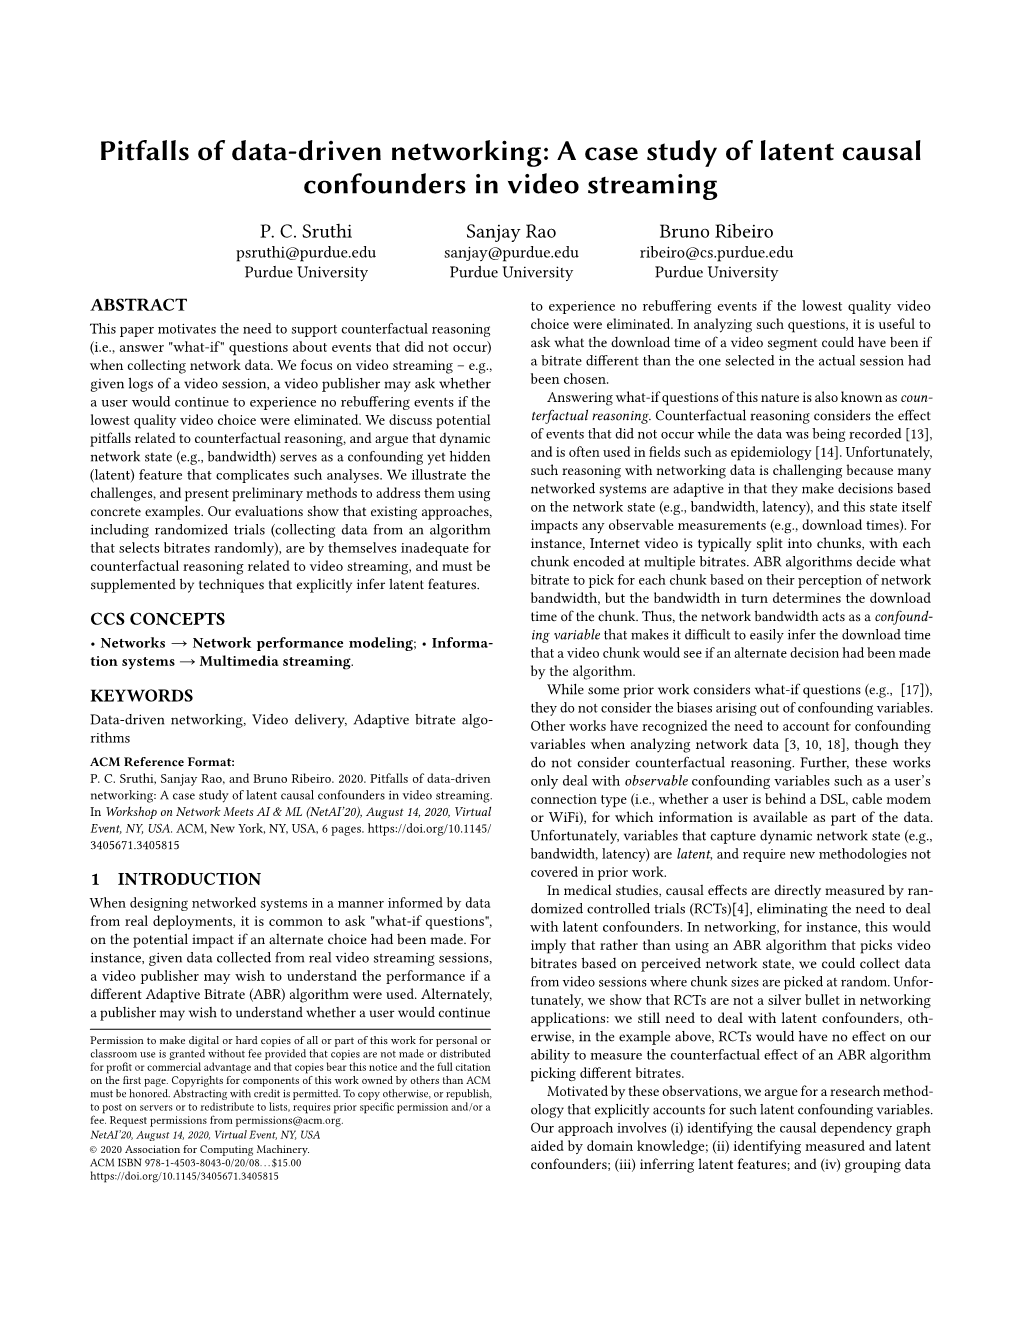 Pitfalls of Data-Driven Networking: a Case Study of Latent Causal Confounders in Video Streaming